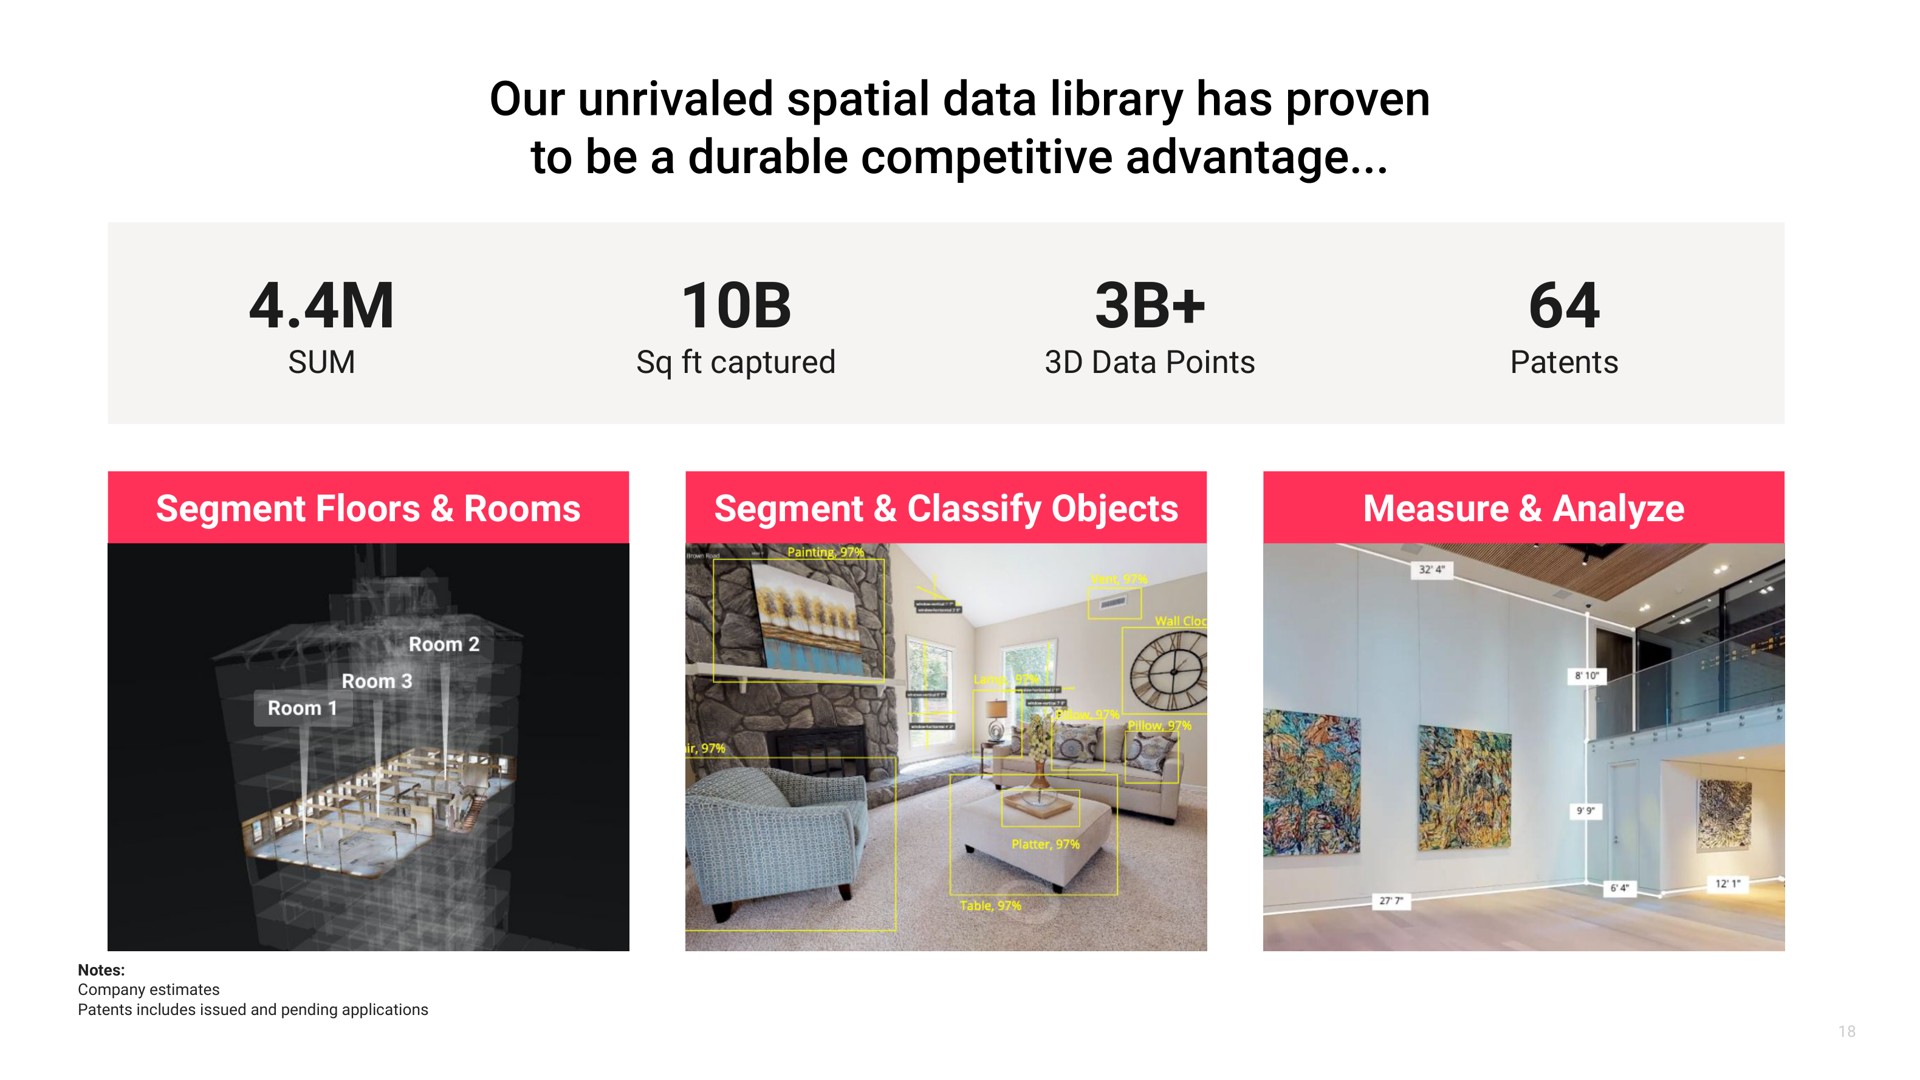 sum captured data points patents segment floors rooms segment objects measure analyze our unrivaled spatial library has proven to be a durable competitive advantage | Matterport